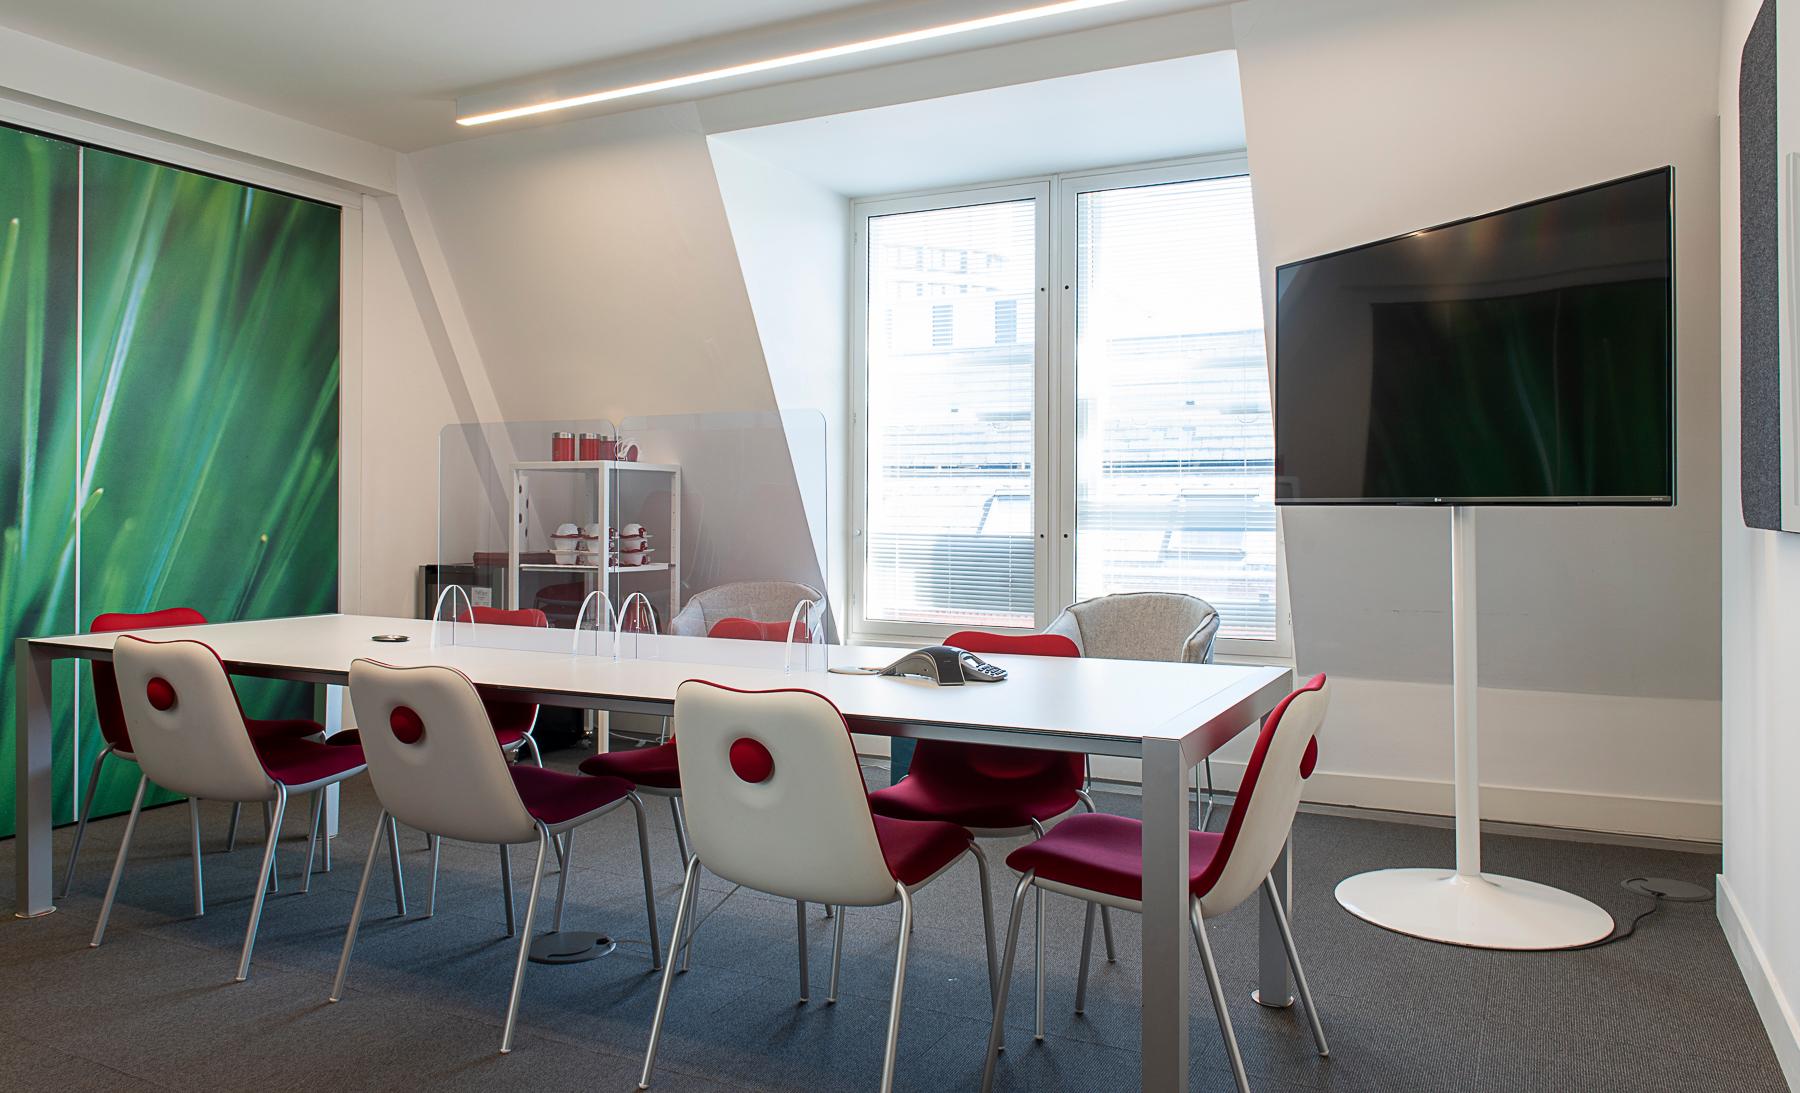 eOffice Fitzrovia, Boardroom For Up To 12 People photo #3